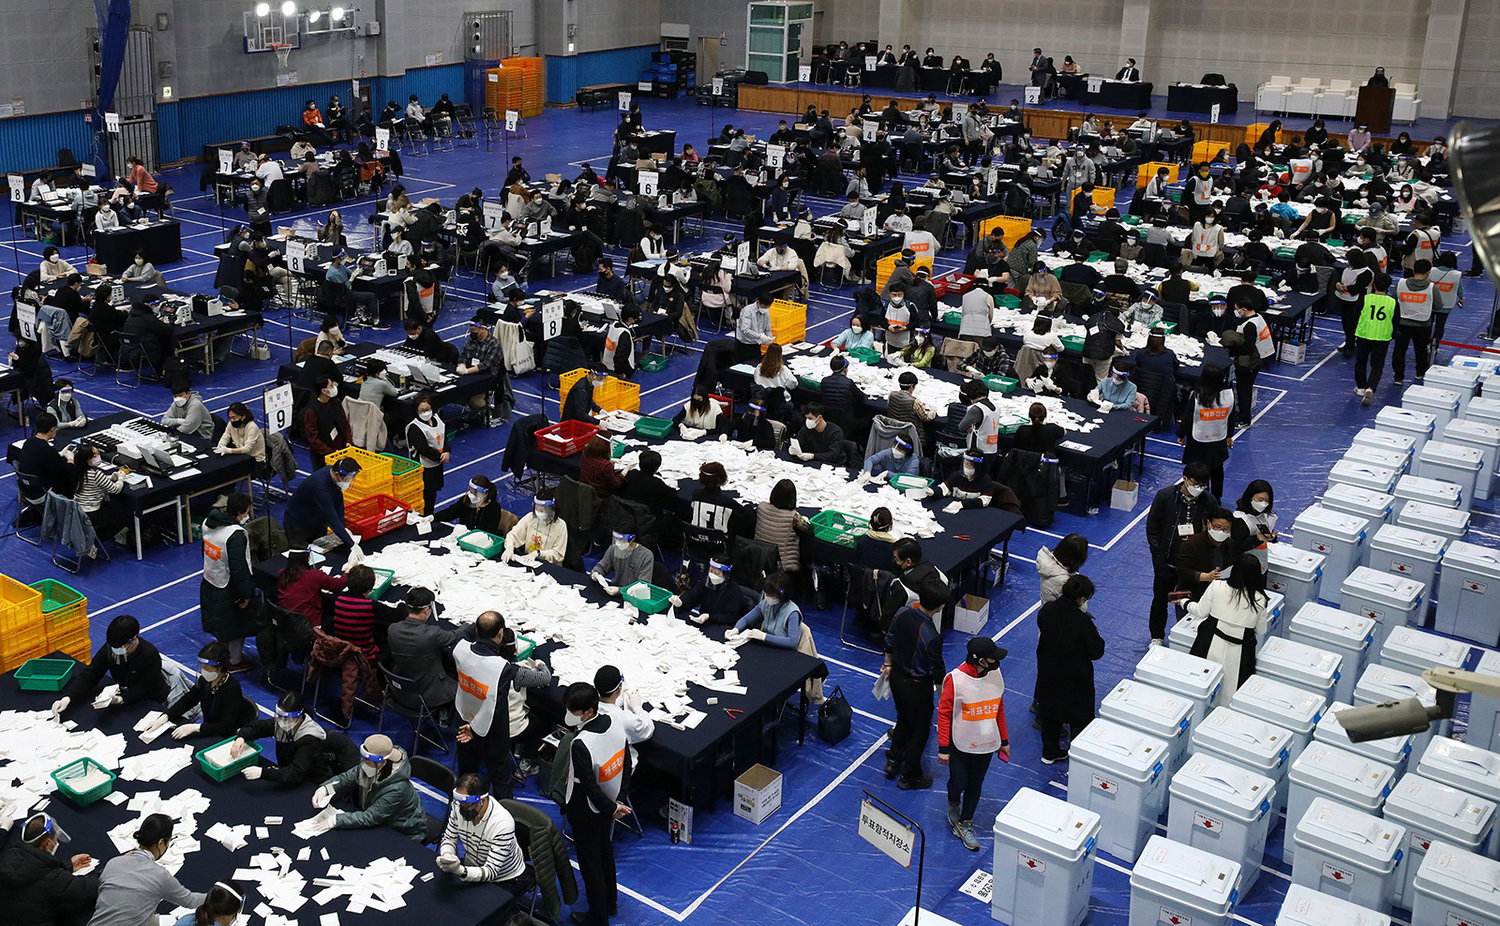 South Korean election officials sort voting papers for ballot counting in the presidential election at a gymnasium in Seoul on March 9, 2022. (Hong Yoon-gi/AFP via Getty Images/TNS)